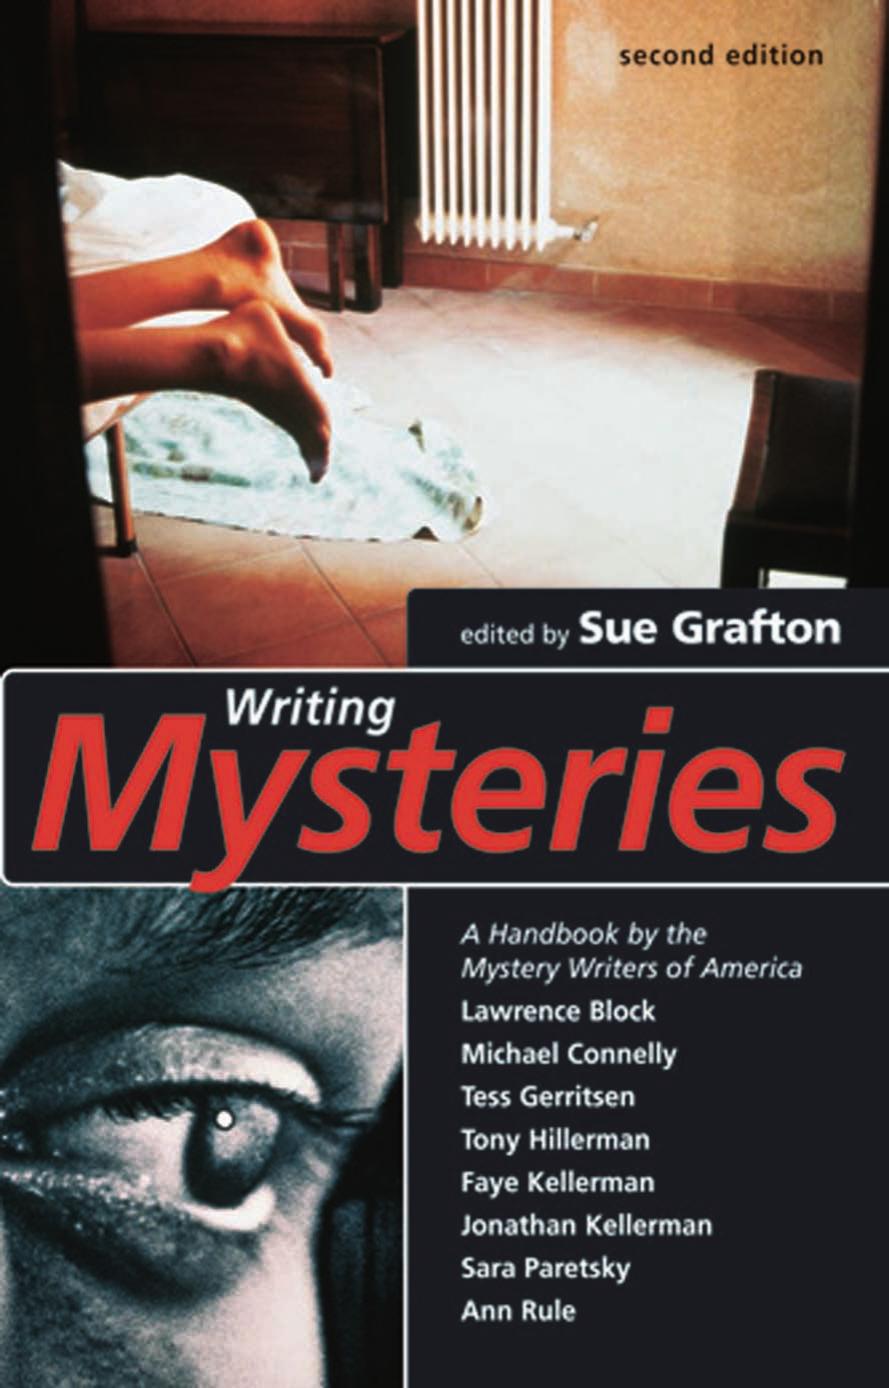 Writing Mysteries by Sue Grafton